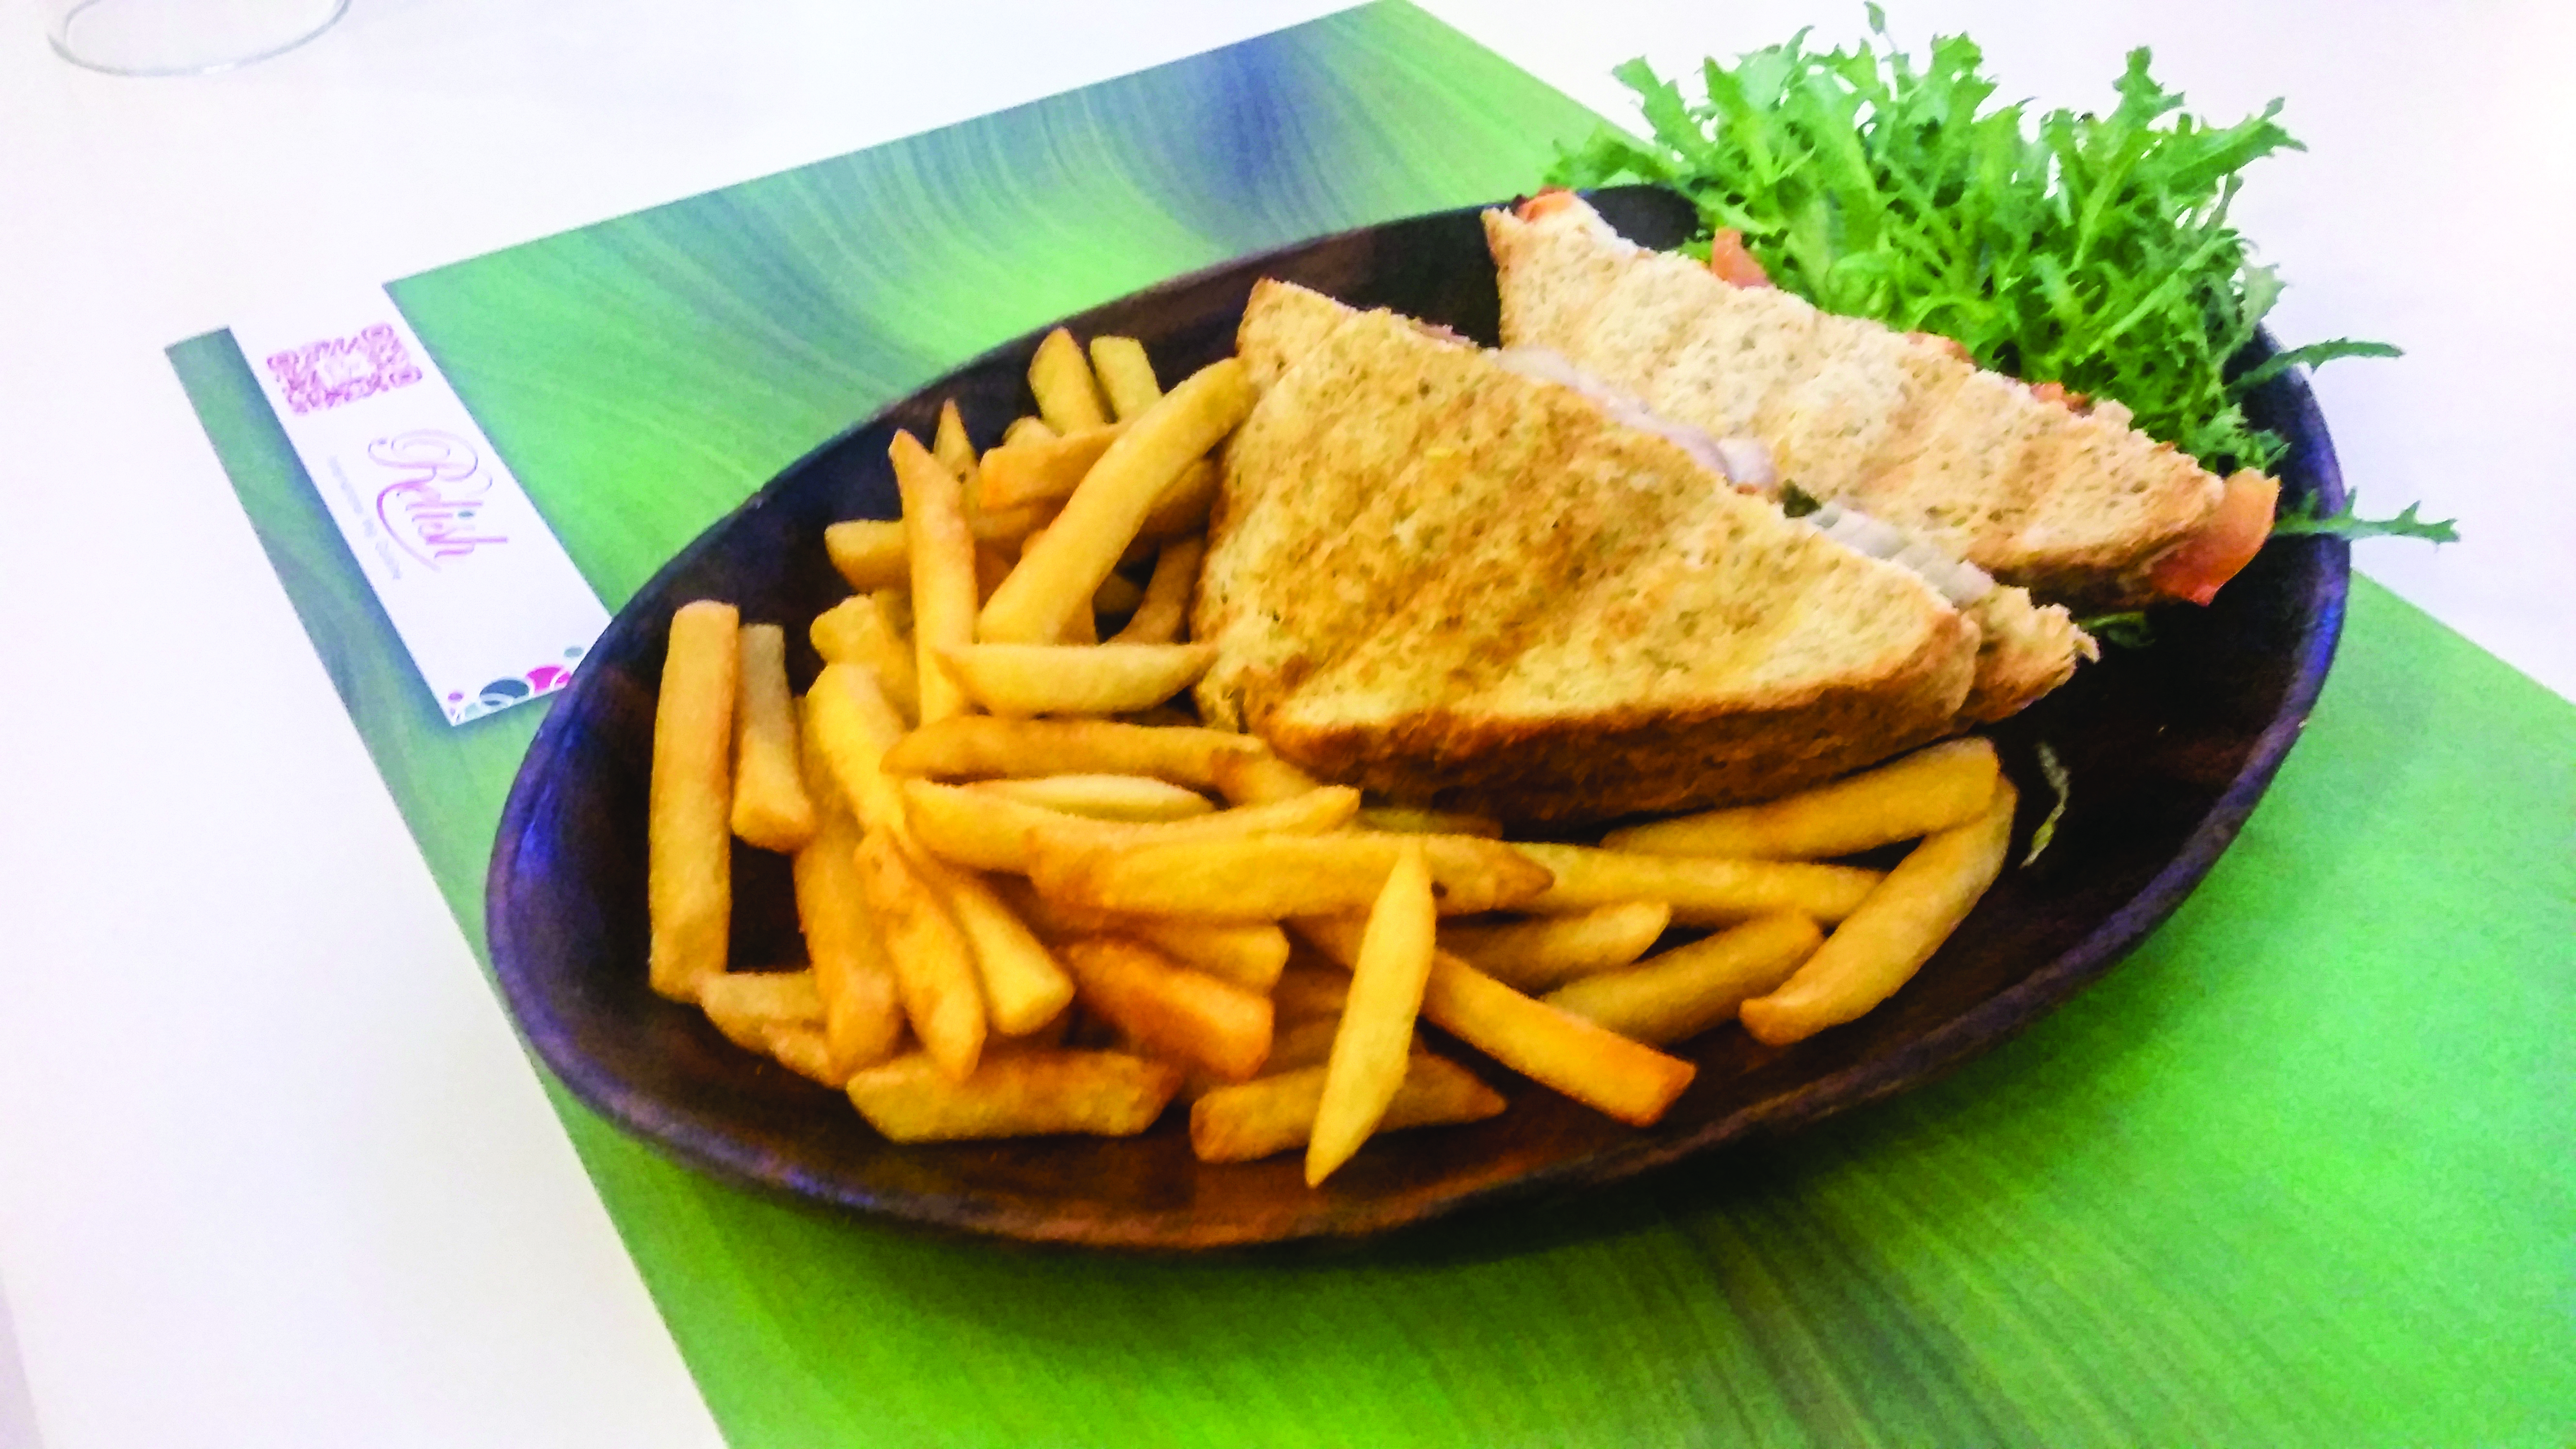 Oman dining: This weekend eat at... Relish